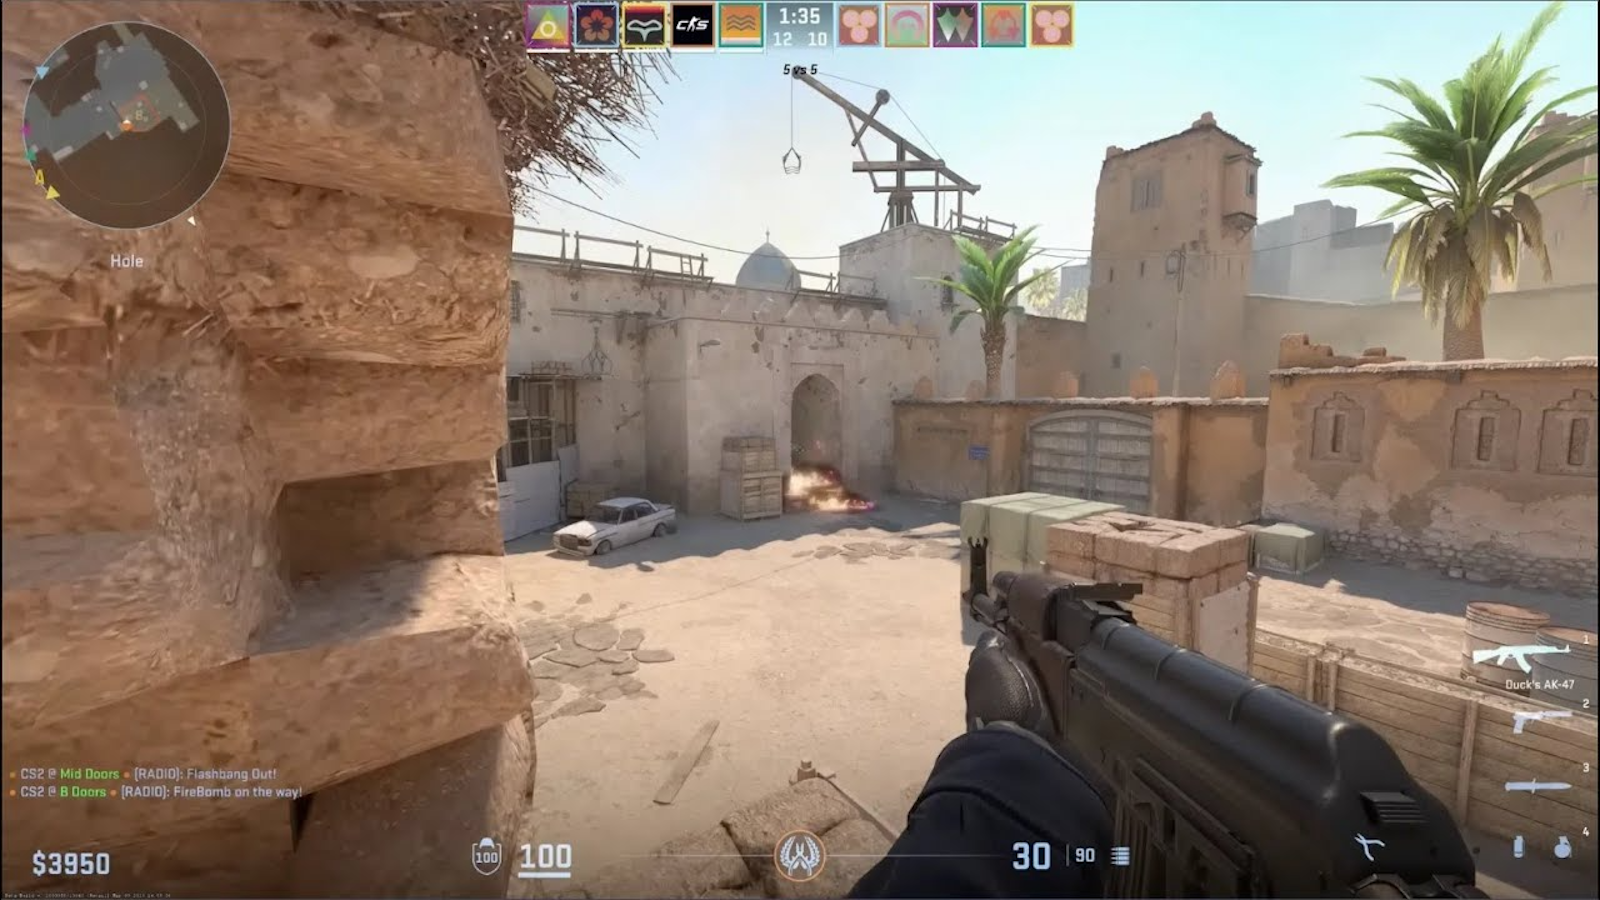 Counter-Strike: Global Offensive - Fire in the Hole! 